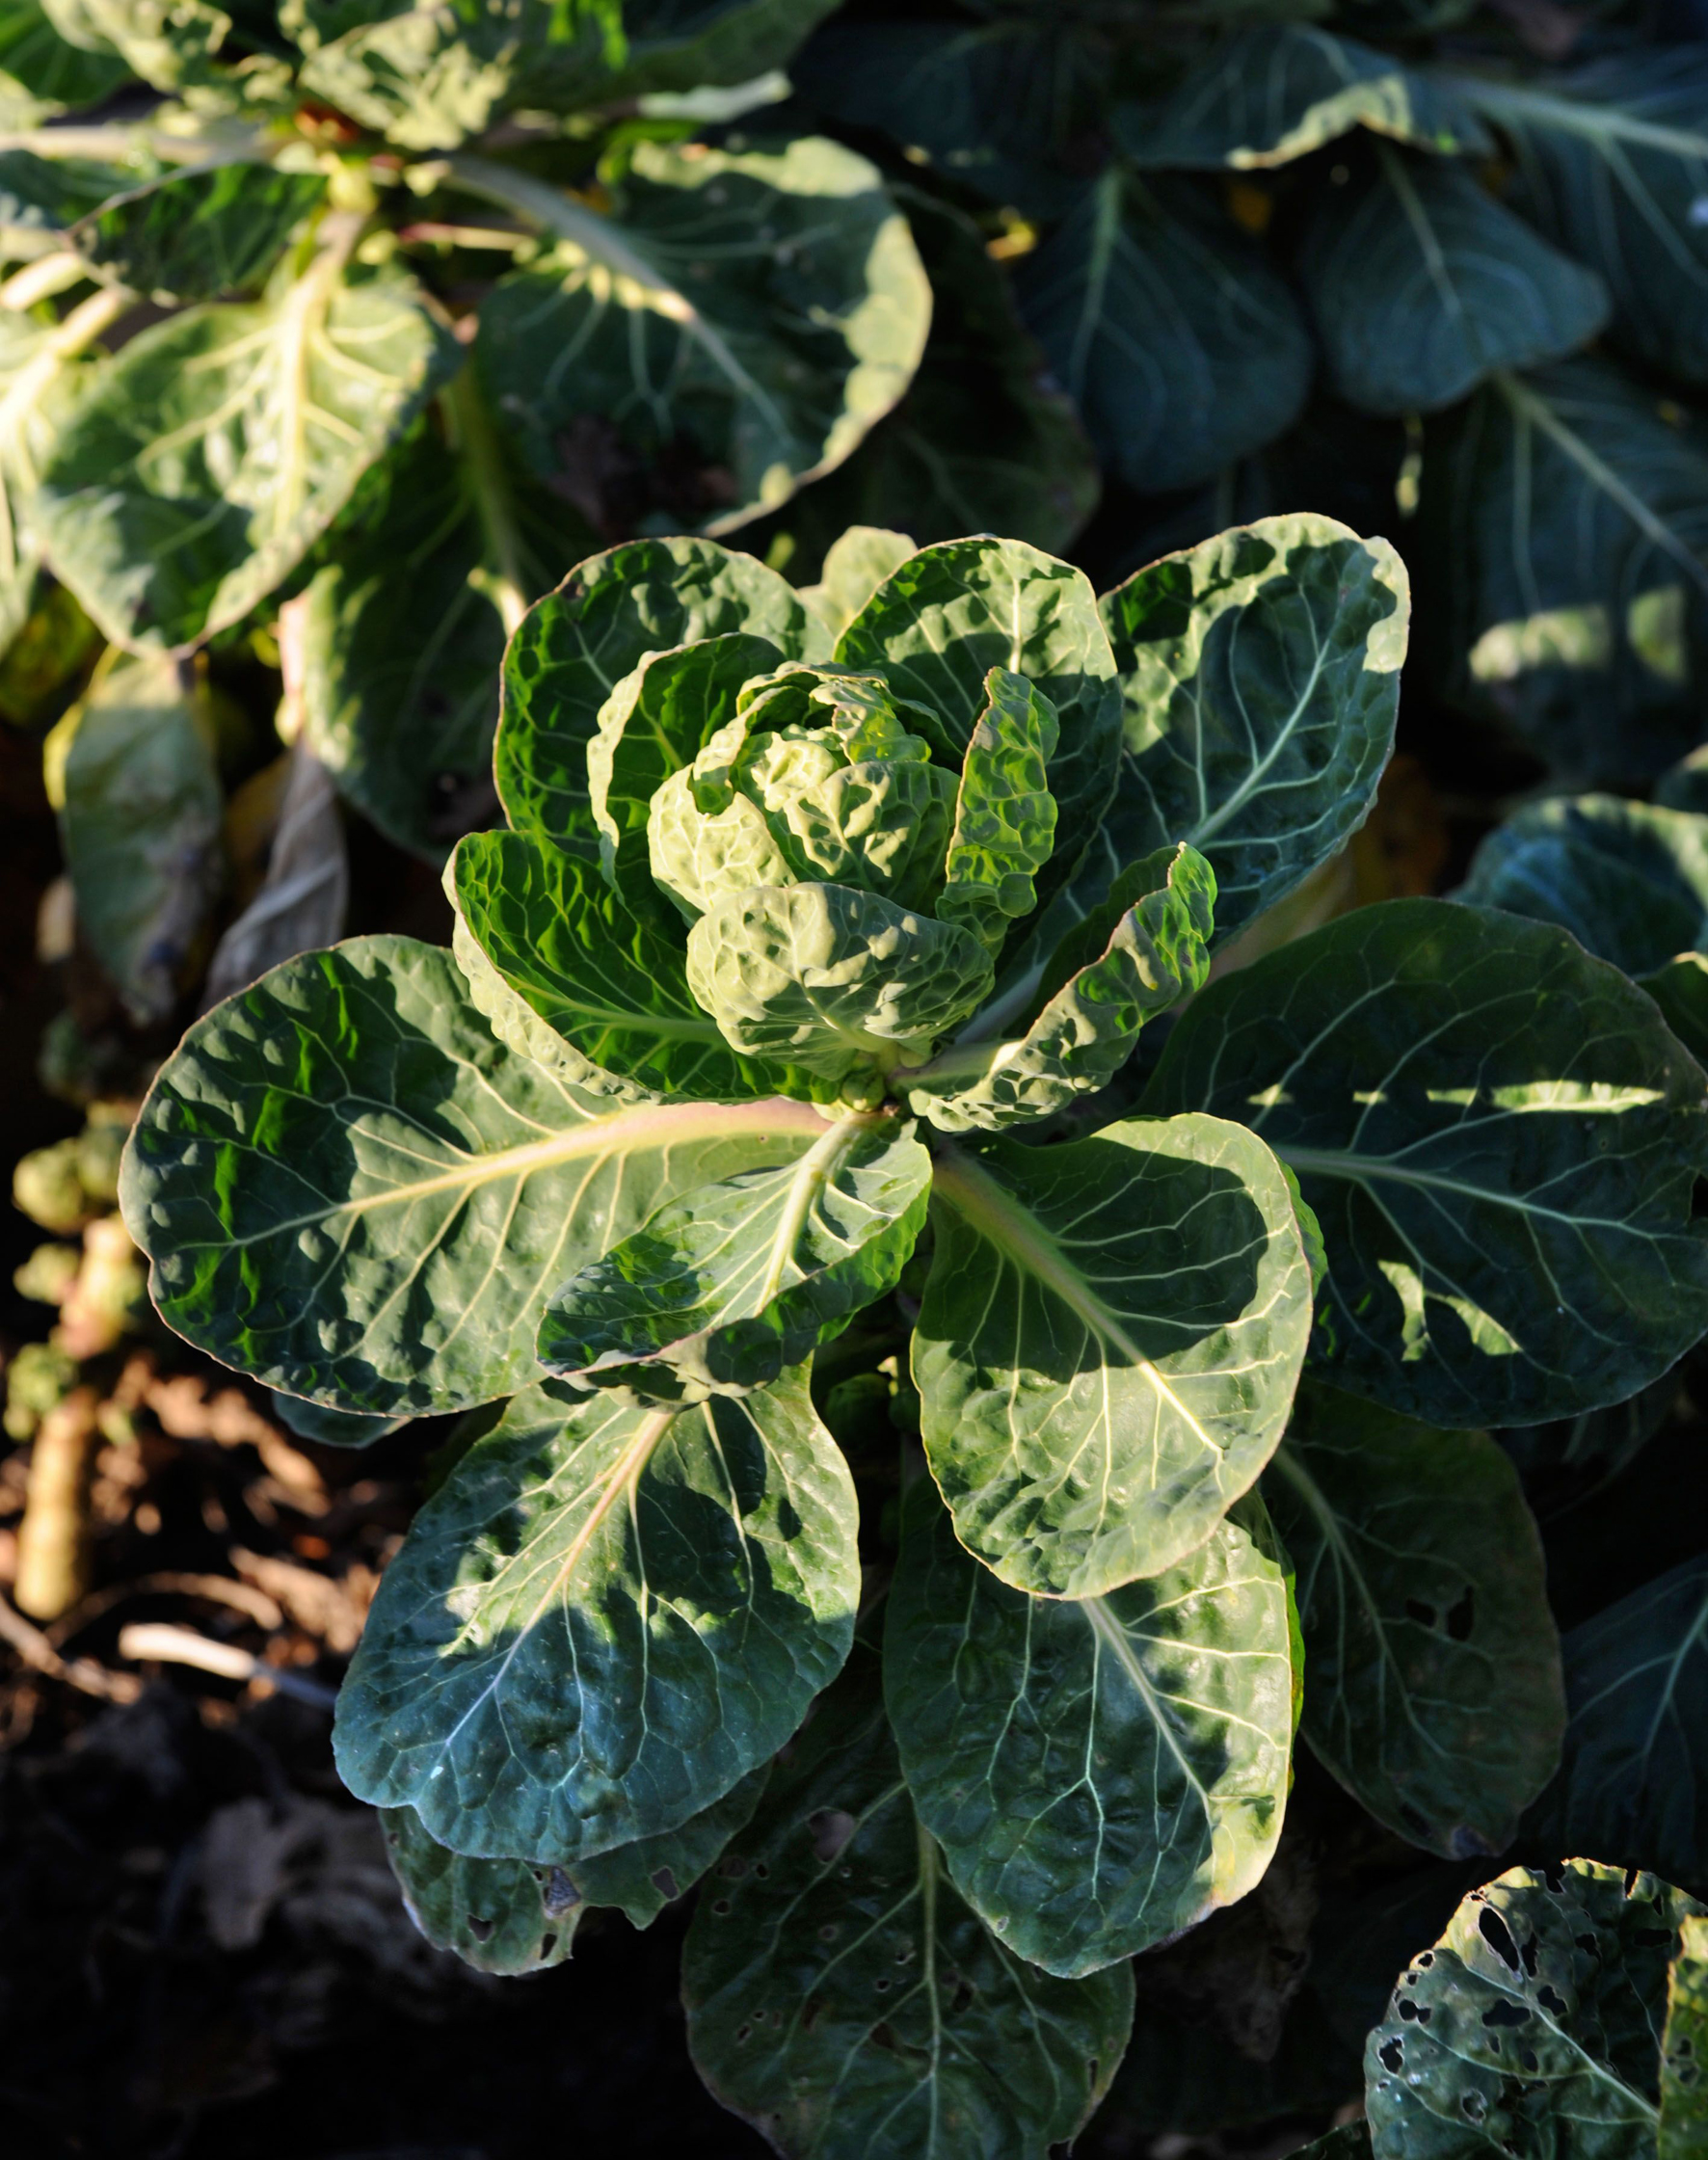 Winter cabbages growing into late autumn